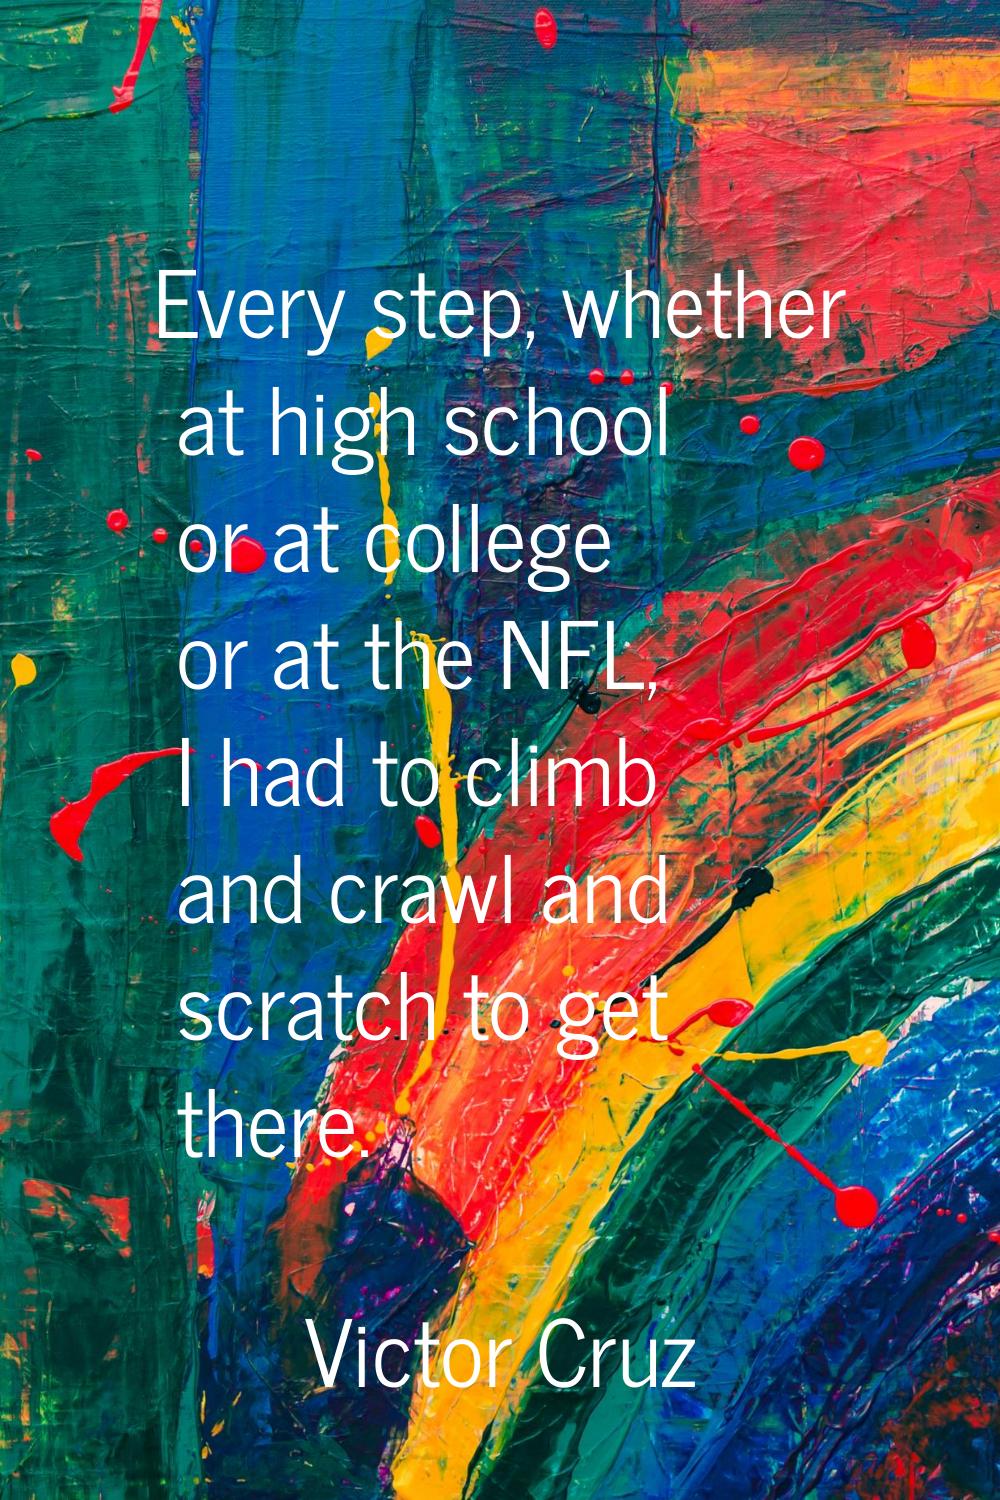 Every step, whether at high school or at college or at the NFL, I had to climb and crawl and scratc